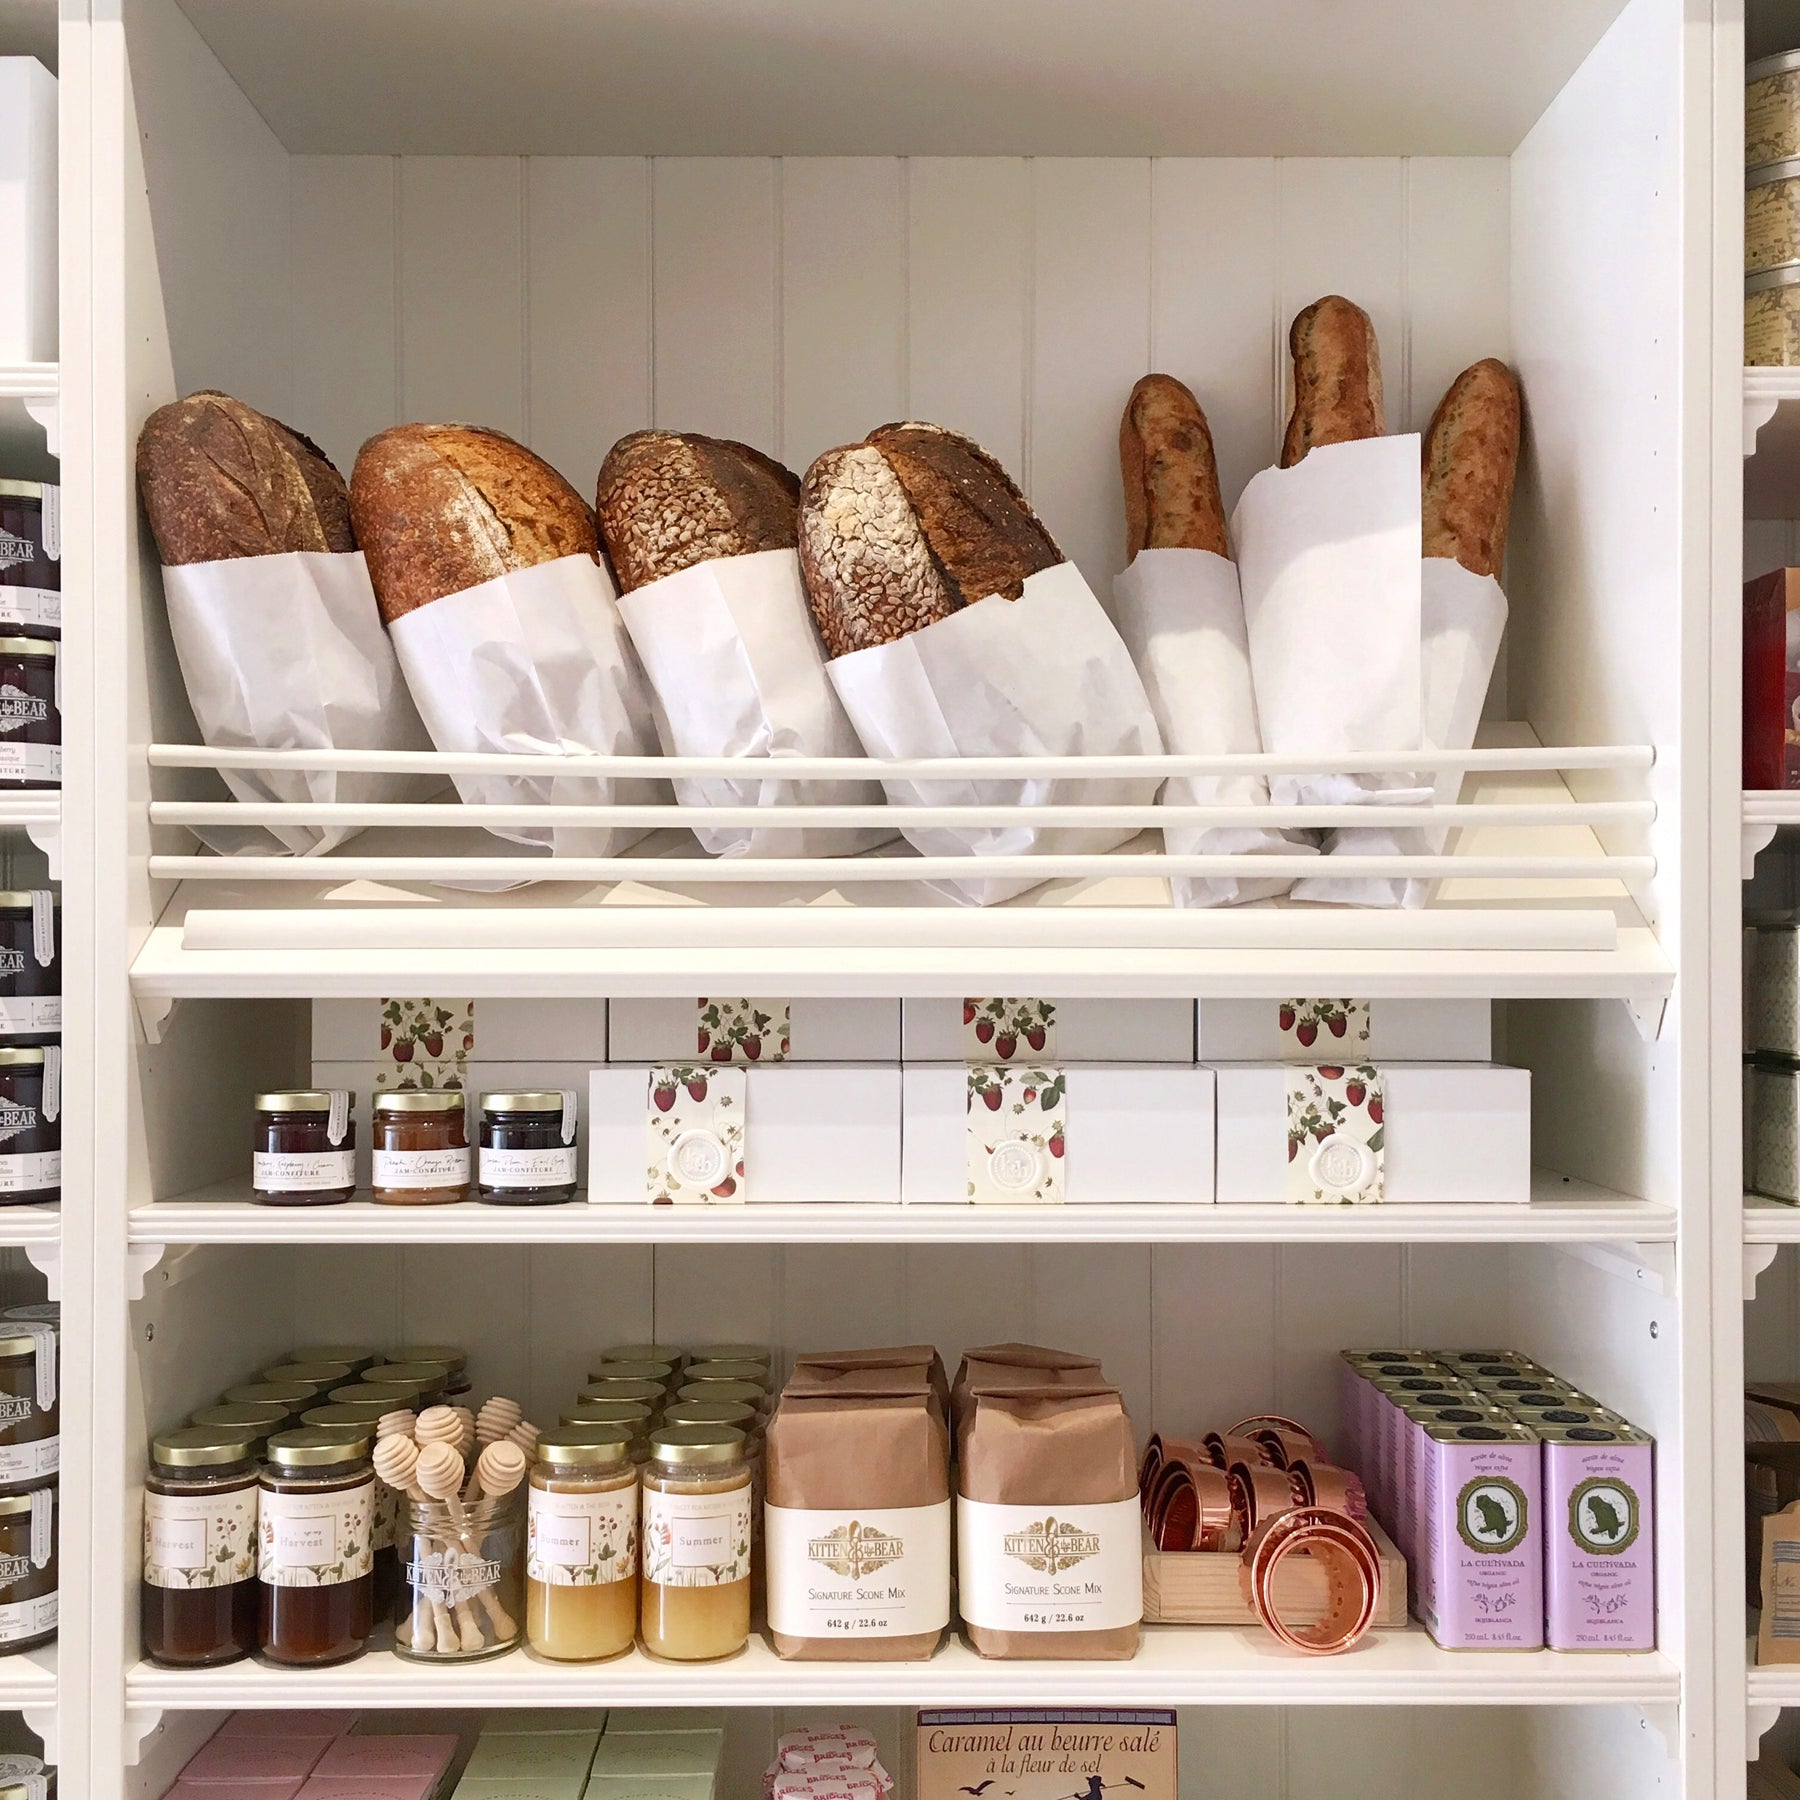 White wooden shelves within Kitten and the Bear hold fresh baked bread (top shelf), seasonal preserves (middle shelf), and pre-packaged baking mixes and baking ware (bottom shelf).